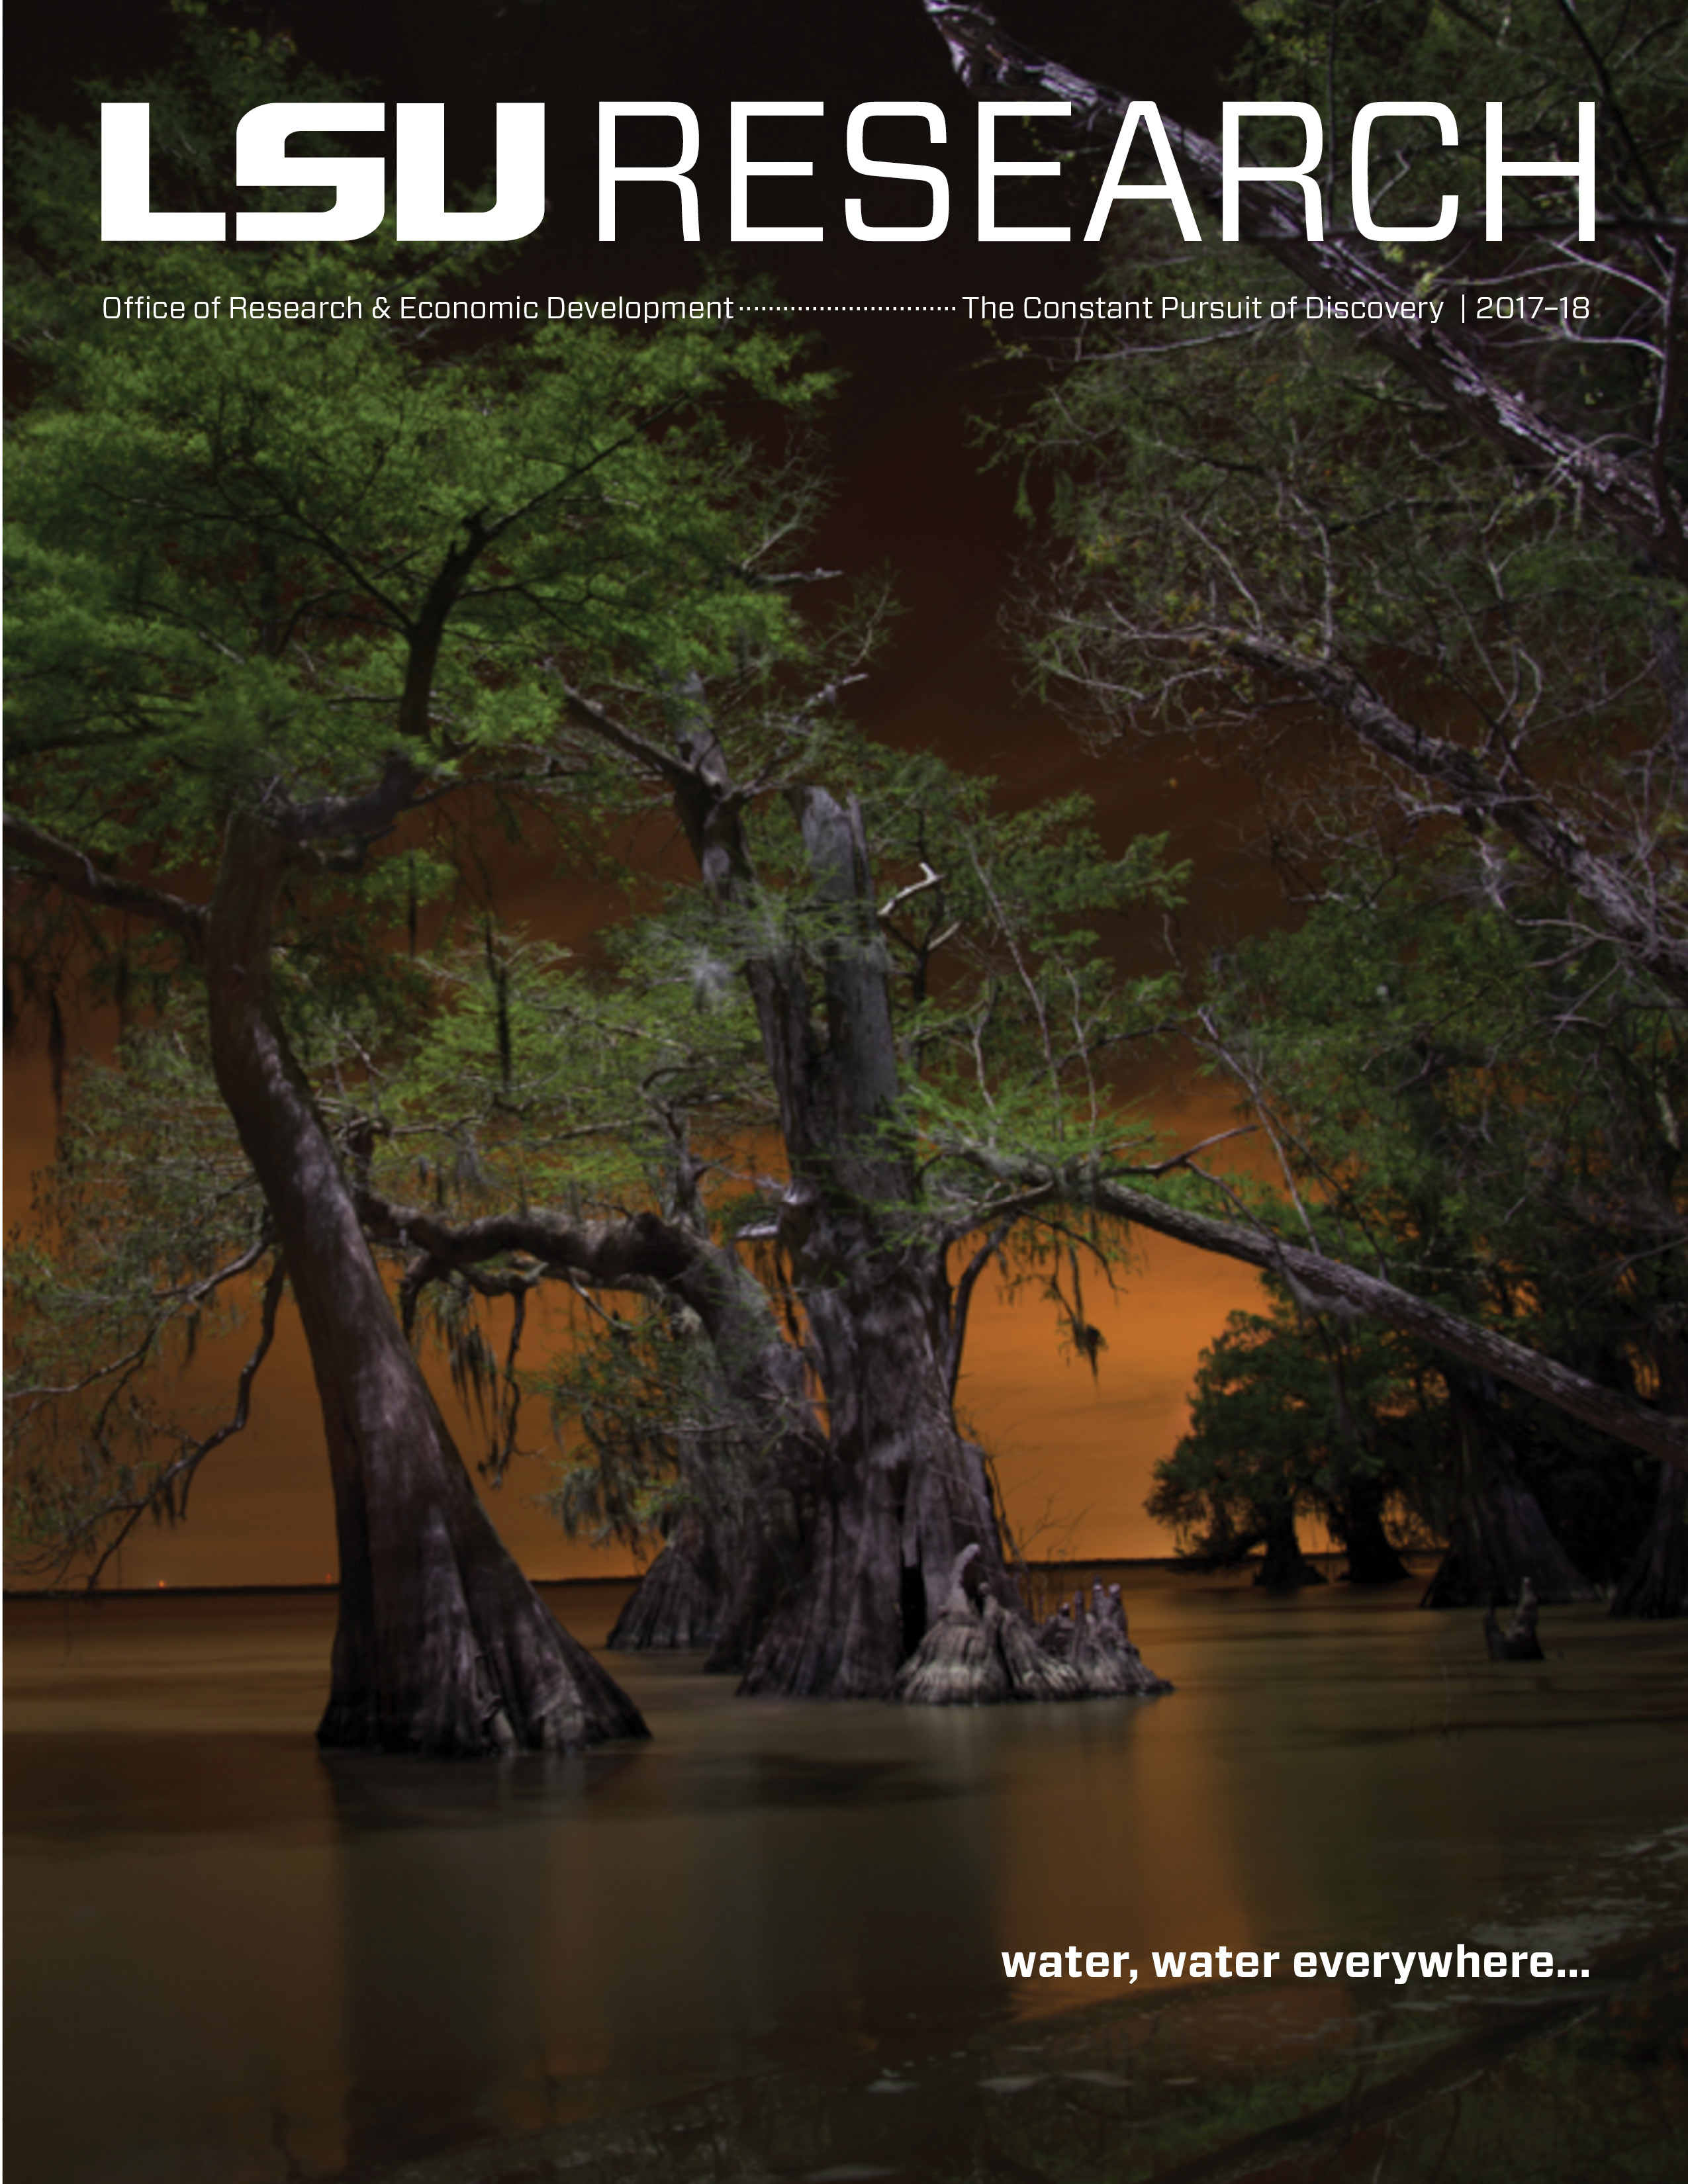 Cover Image of Research Magazine 2017: Water, Water Everywhere